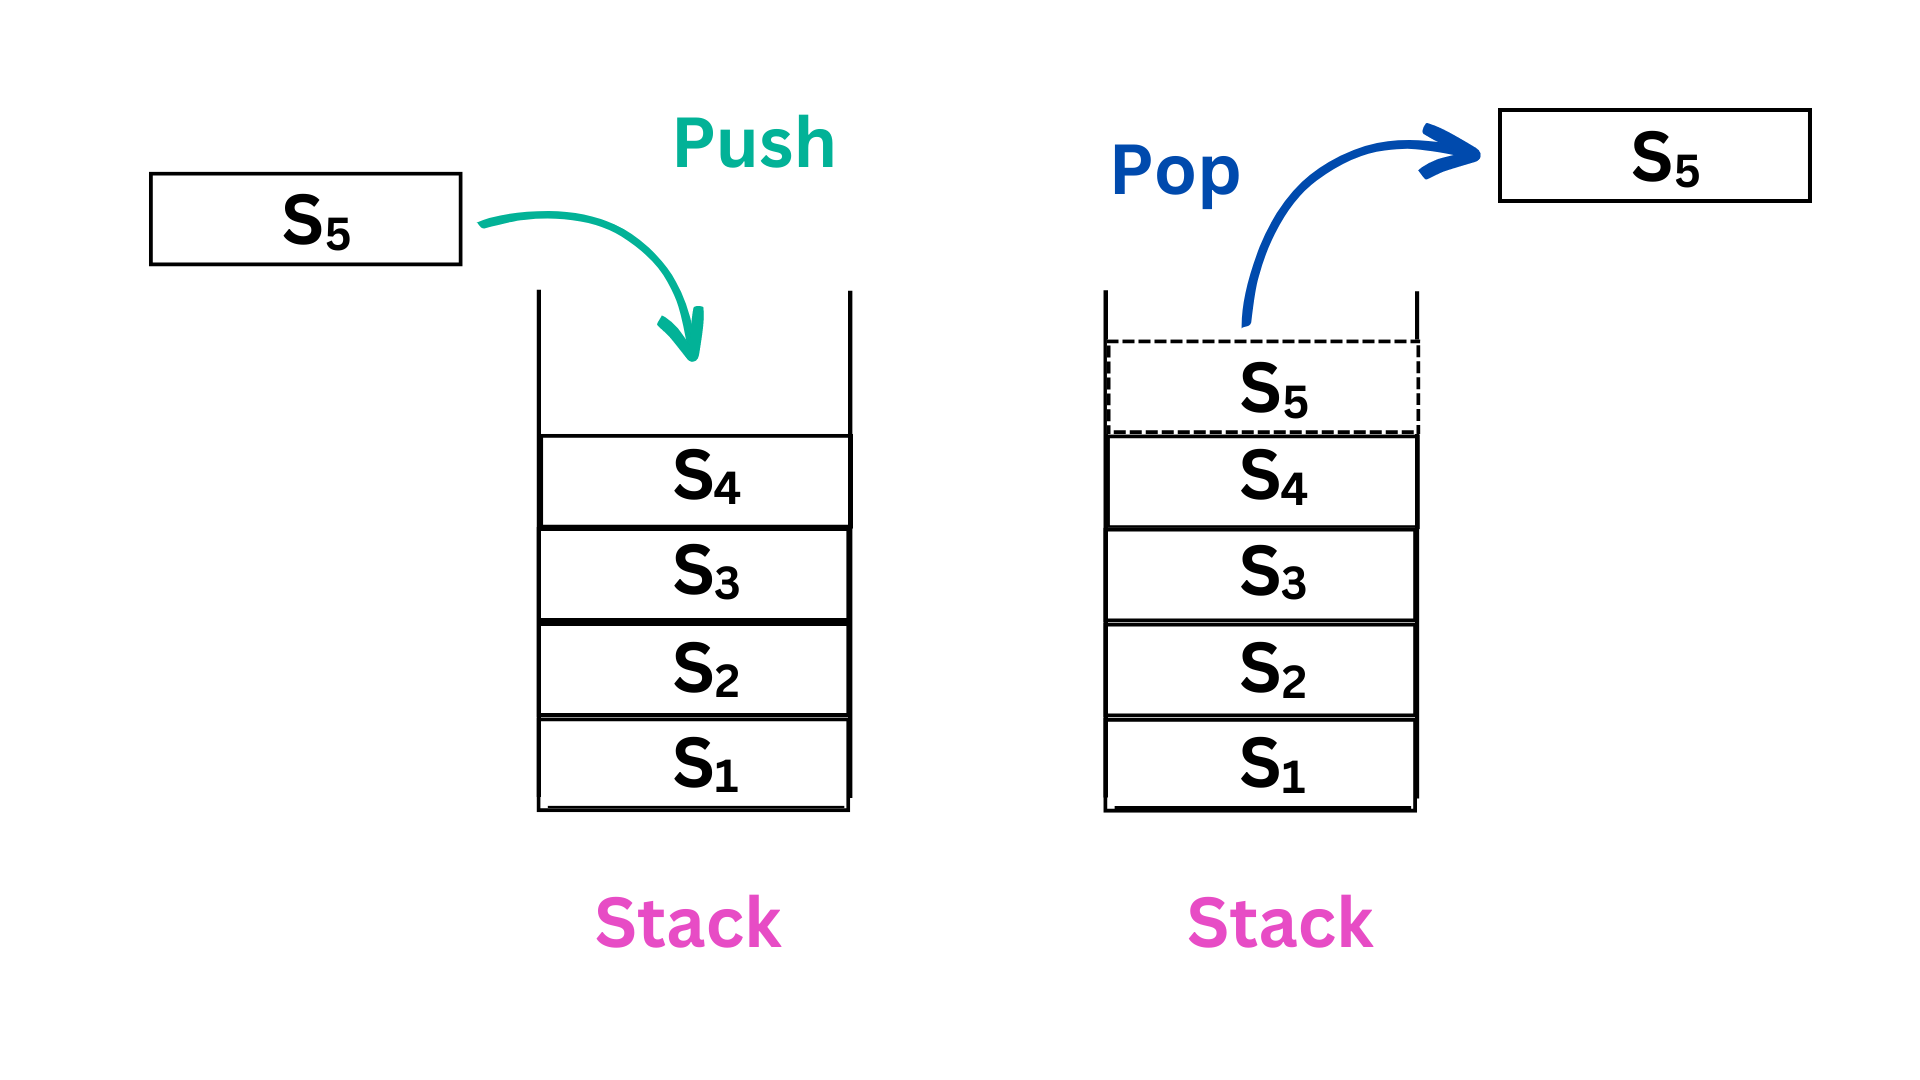 Common Data Structures